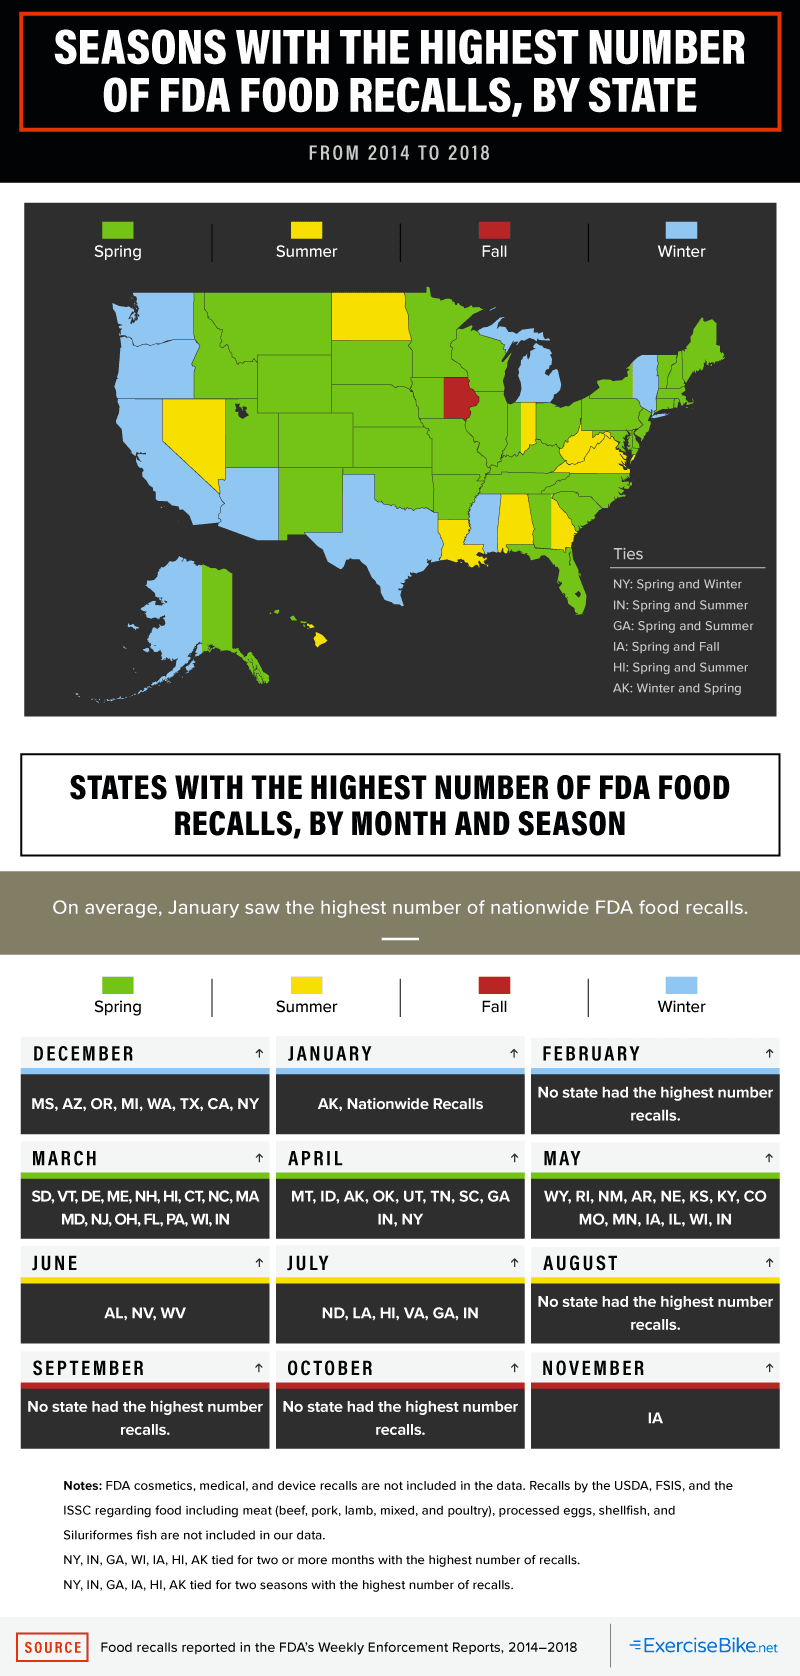 Seasons with the Highest Number of FDA Food Recalls